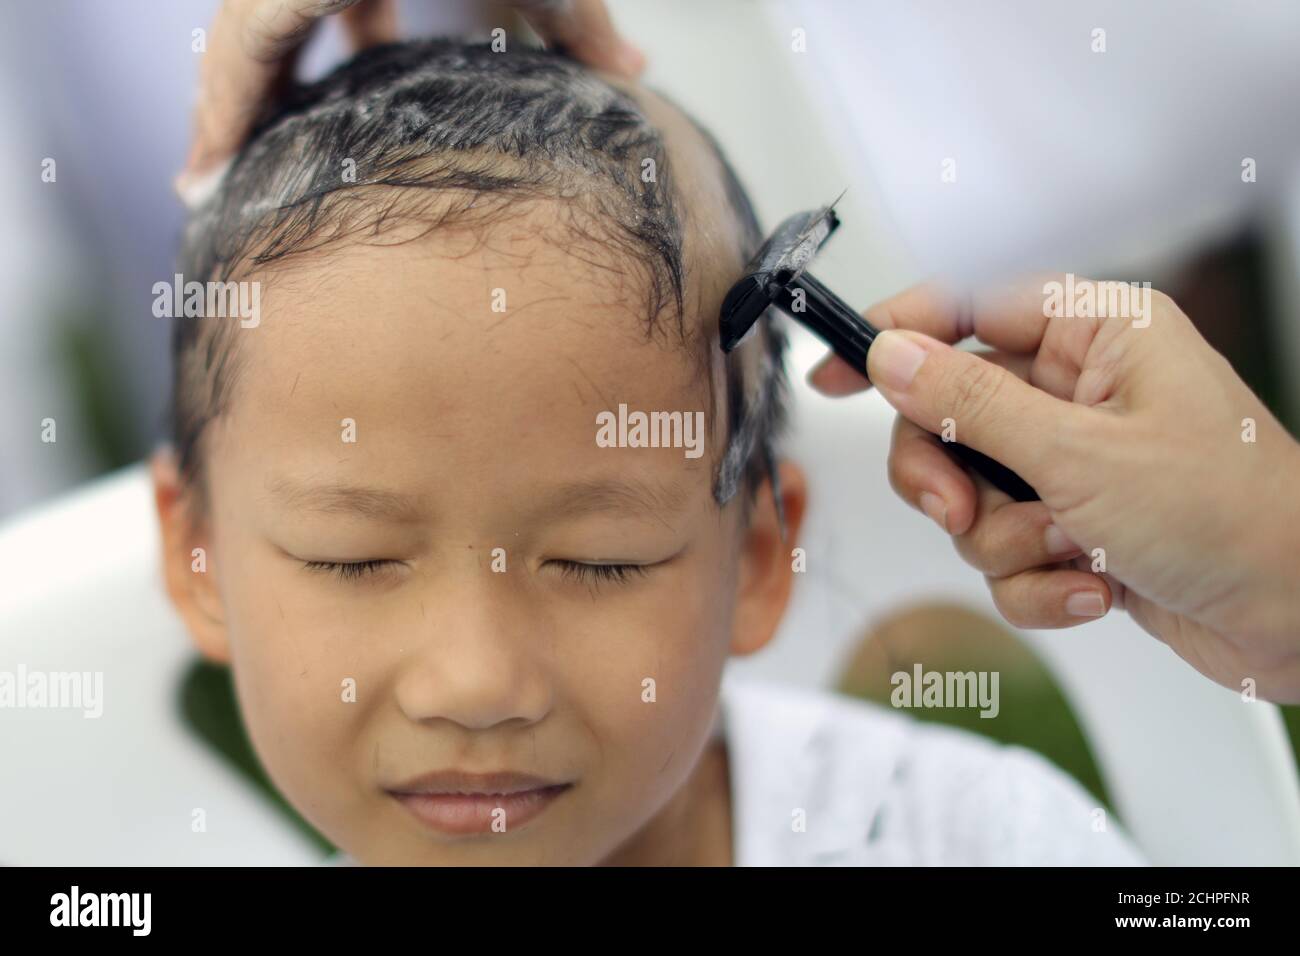 A devotee girl has her hair shaved by her father during a mass novice nun  ordination ceremony to mark the first anniversary of late Thailand's King  Bhumibol Adulyadej's death, at the Sathira-Dhammasathan